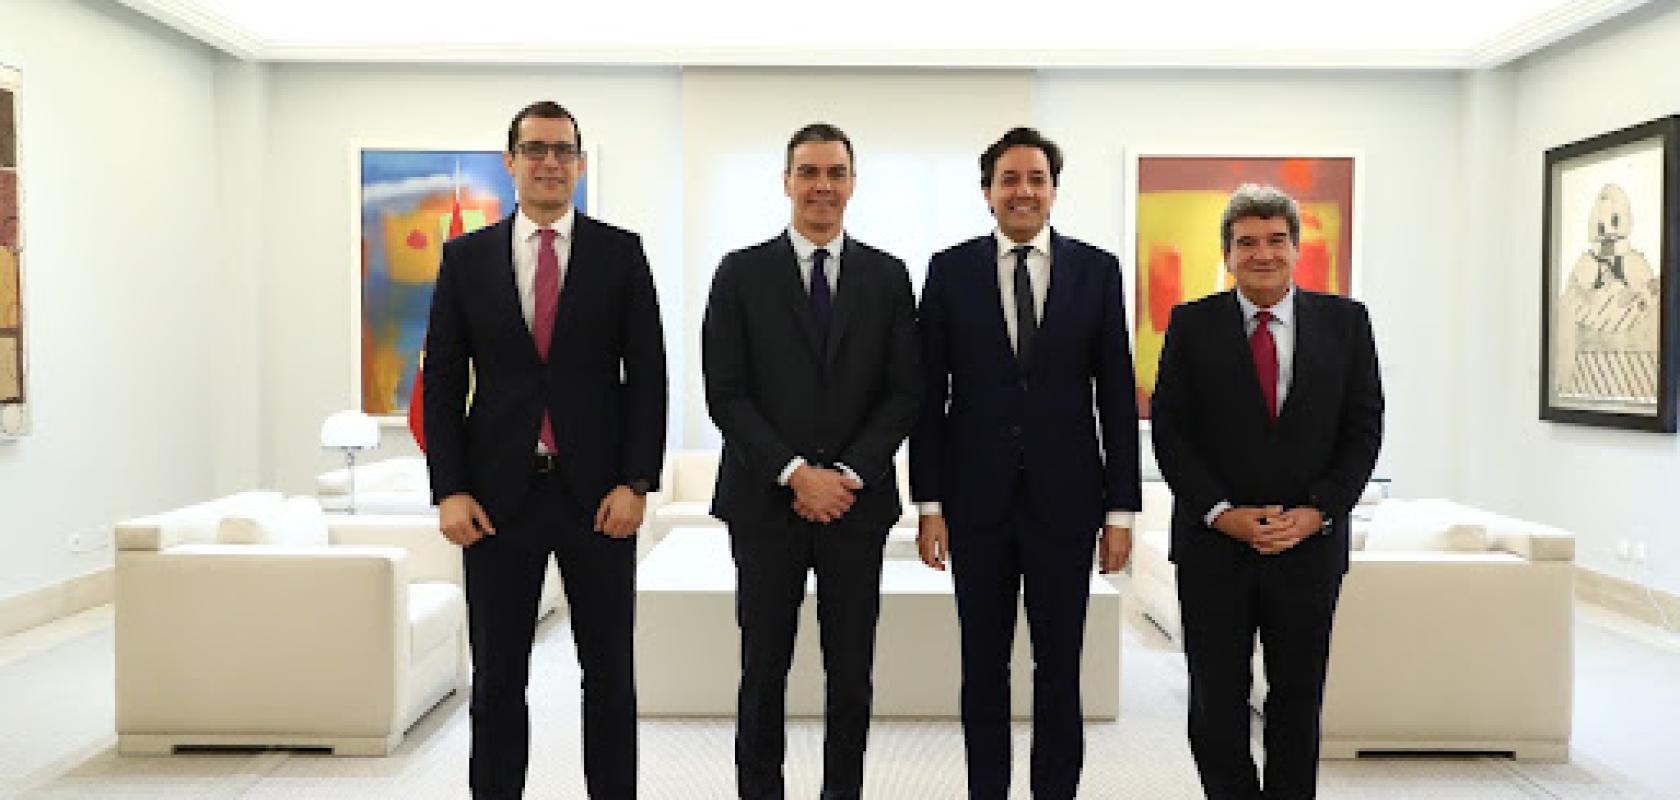 From left to right, Horacio Morell, General Manager IBM Spain, Portugal, Greece and Israel; Pedro Sánchez, Prime Minister of Spain; Darío Gil, IBM Senior Vice President and Director of IBM Research; and José Luis Escrivá, Minister for Digital Transformation and Public Function of Spain, at La Moncloa Palace in Madrid, headquarters of the Presidency of the Government of Spain.